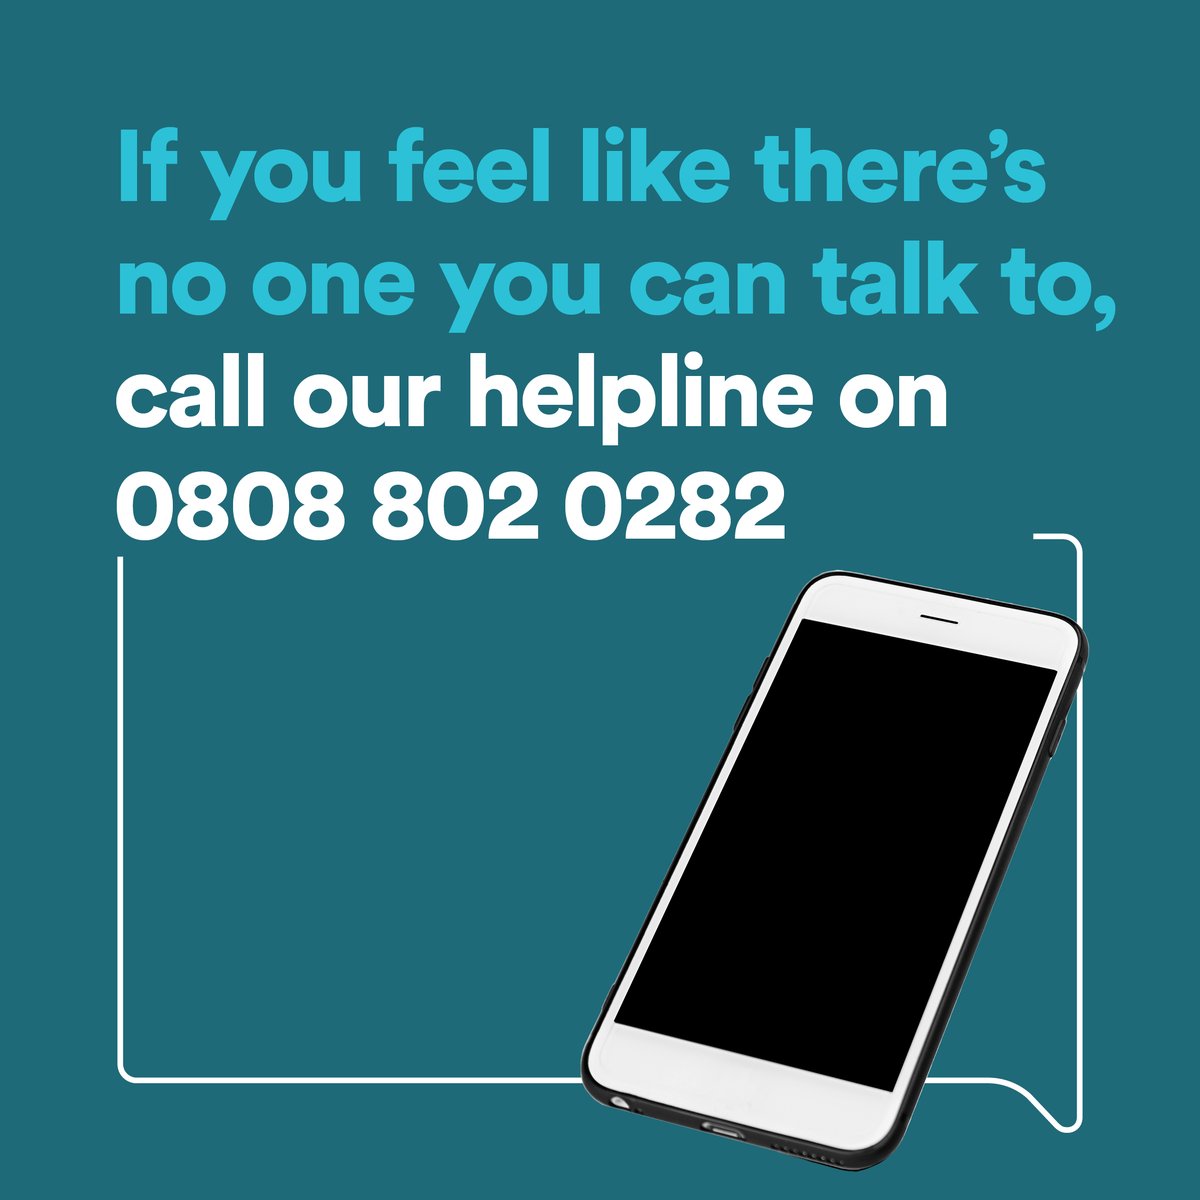 If you're struggling this long weekend remember, #wevegotyou

Our free & confidential helpline is open 24/7. 📞 0808 802 0282

#hospitalityaction